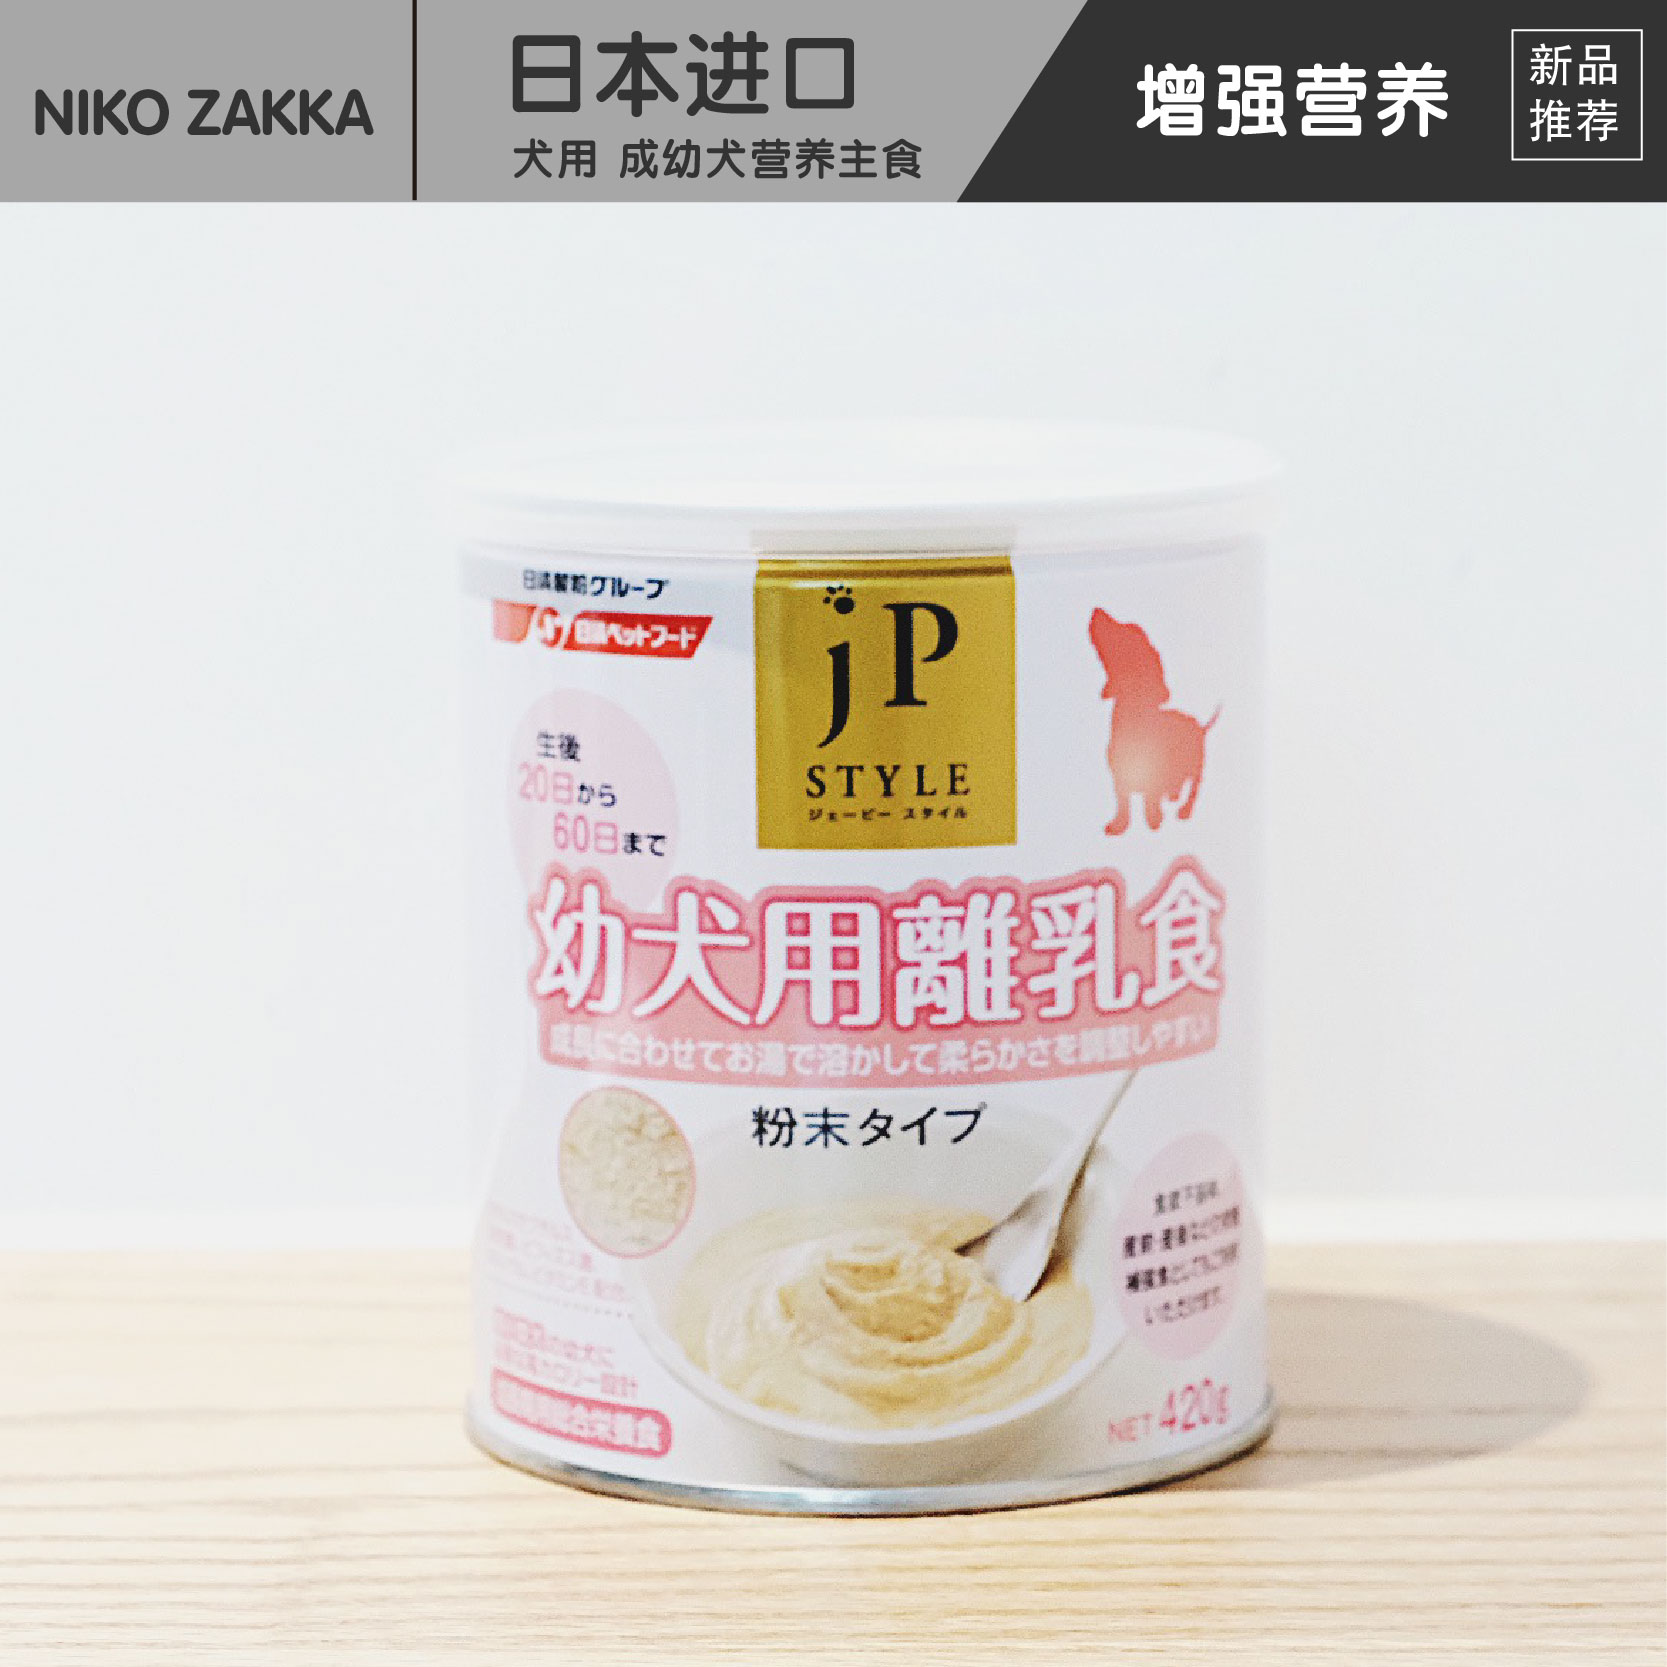 Japanese Native Japan Japanese Puppies from Dairy Milk Rice Cakes Rice Burnt 420g Puppy Pregnancy Nutrition Supplements for Nutritious Food Supplements